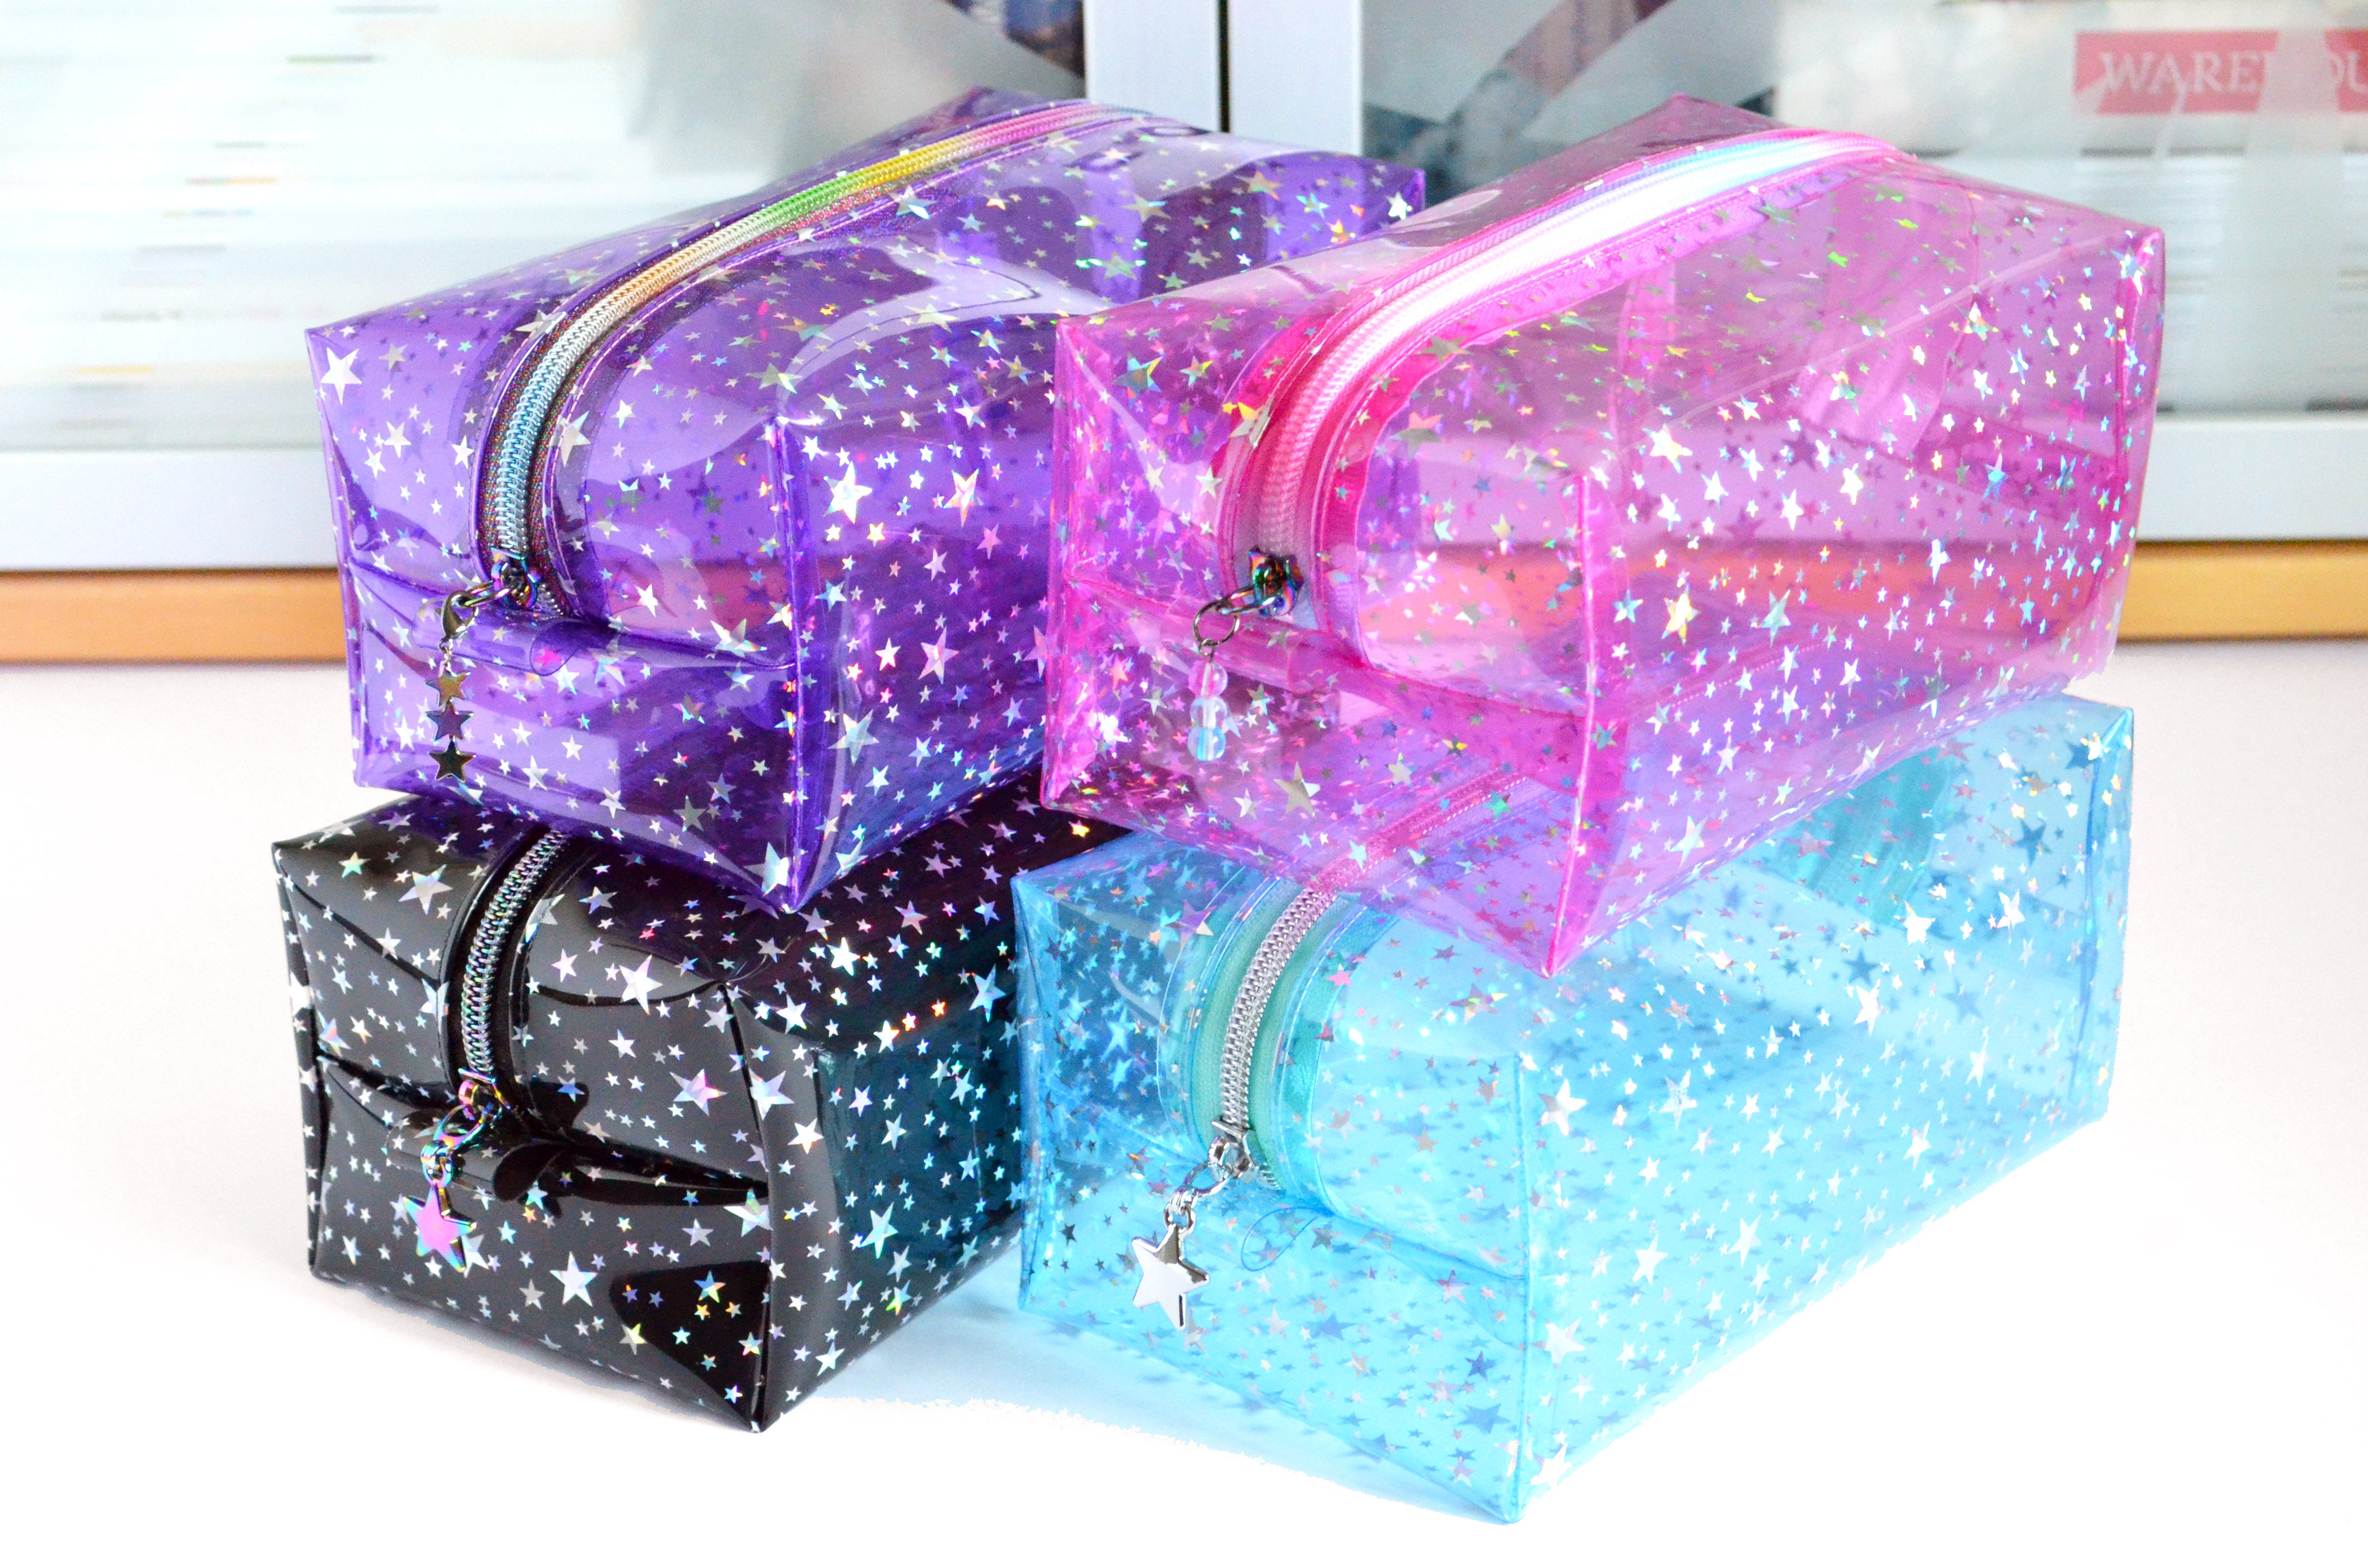 *Clear Vinyl* Pink Holographic Stars Toiletry Bag